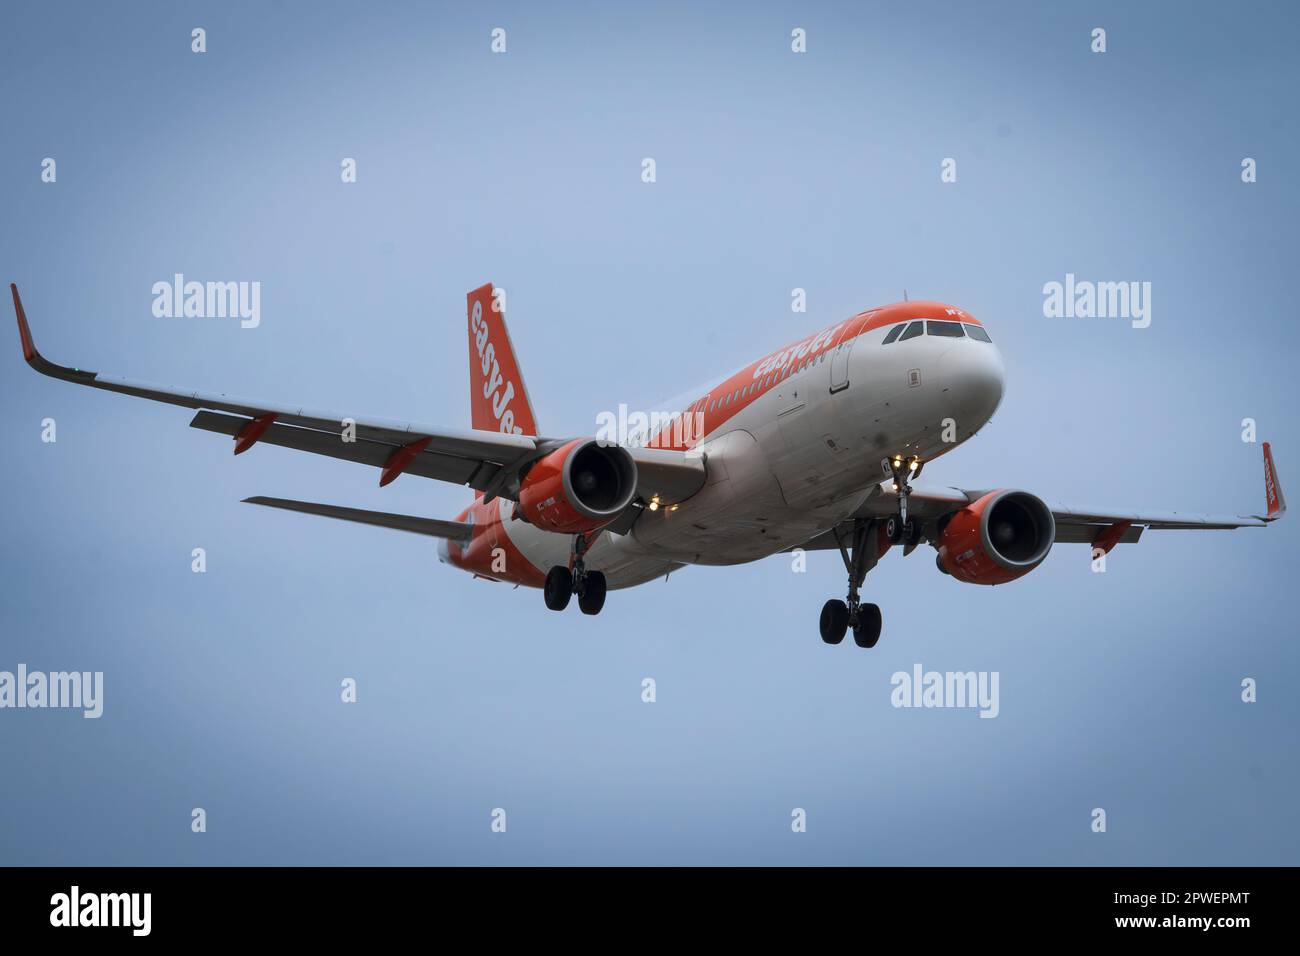 Easyjet Airbus A320-214 call sign G-EZWZ coming in to land. Stock Photo